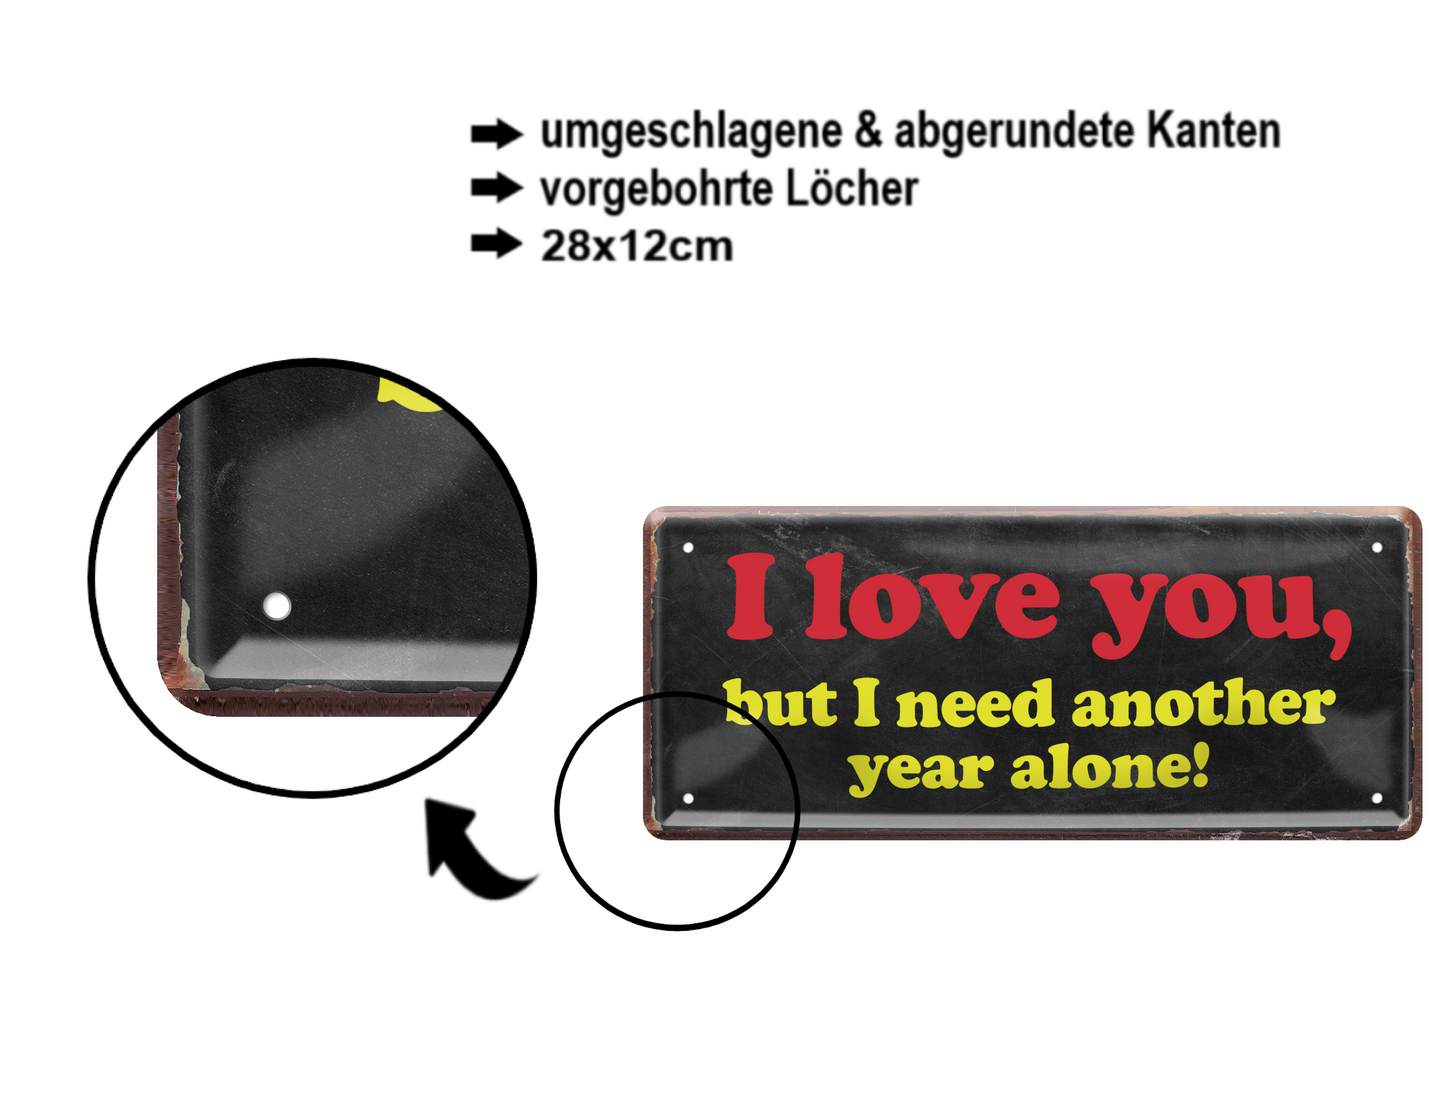 Blechschild ''I love you but i need another year alone!'' 28x12cm